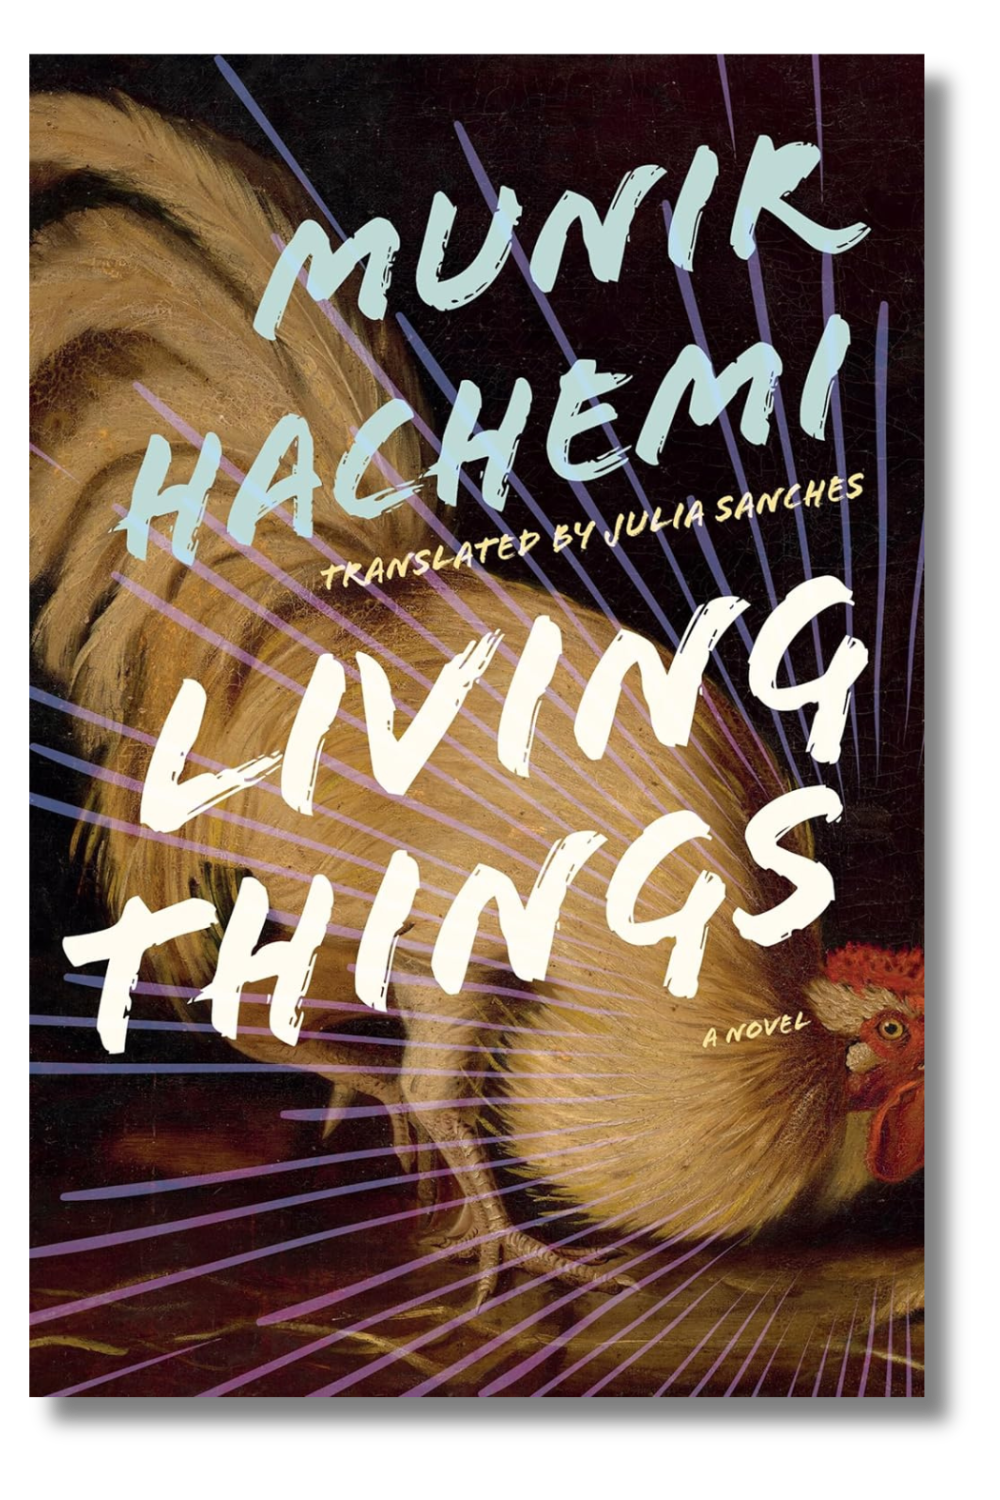 The cover of "Living Things" by Munir Hachemi, translated by Julia Sanches